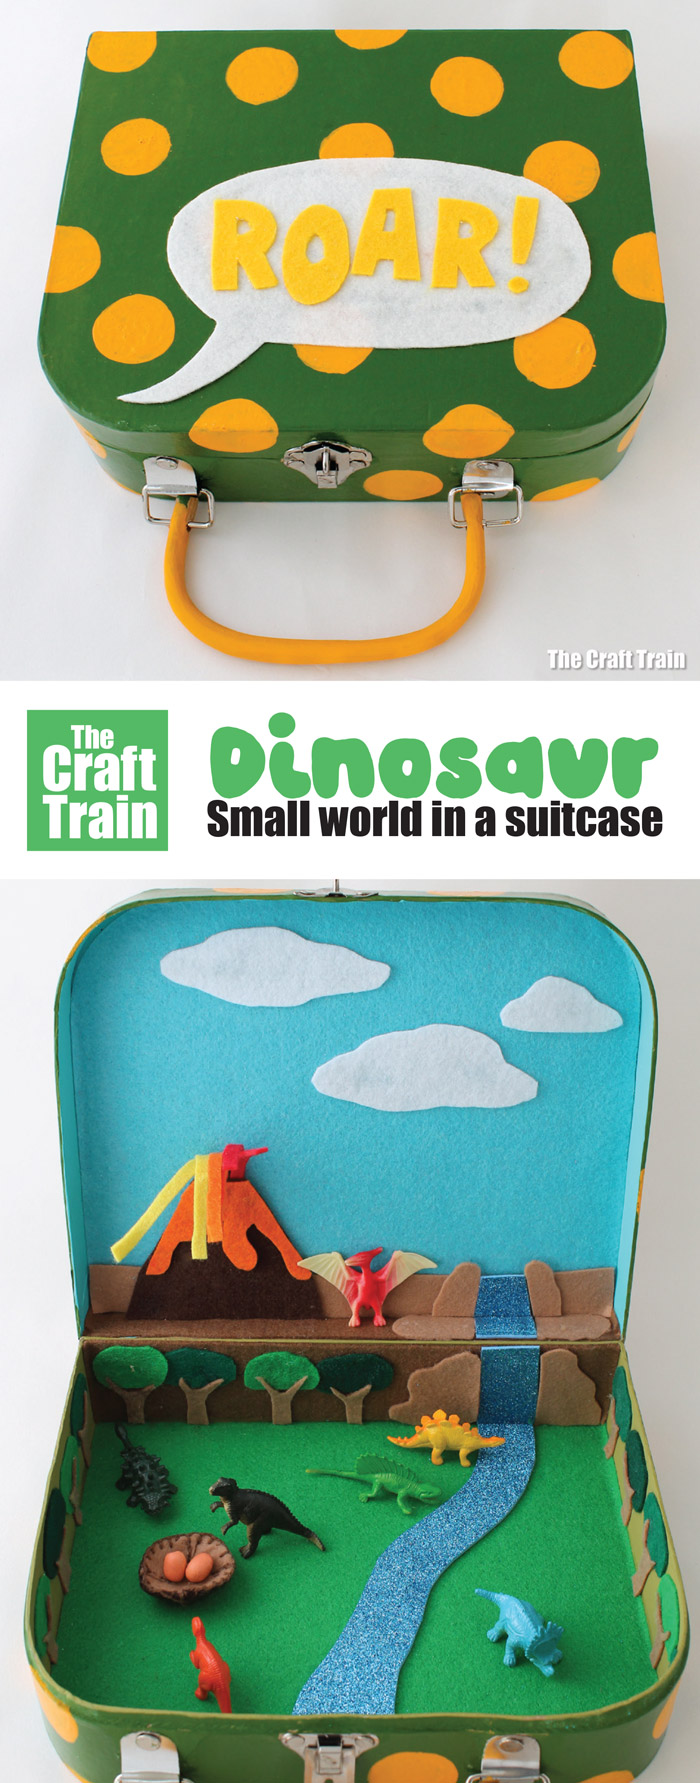 How to make a dinosaur small world in a suitcase. This is a great DIY toy to spark imaginary play and can be useful for long car trips or playing on the go #dinosaur #kidscraft #smallworld #handmadegifts #diytoys #suitcasecrafts #imaginaryplay